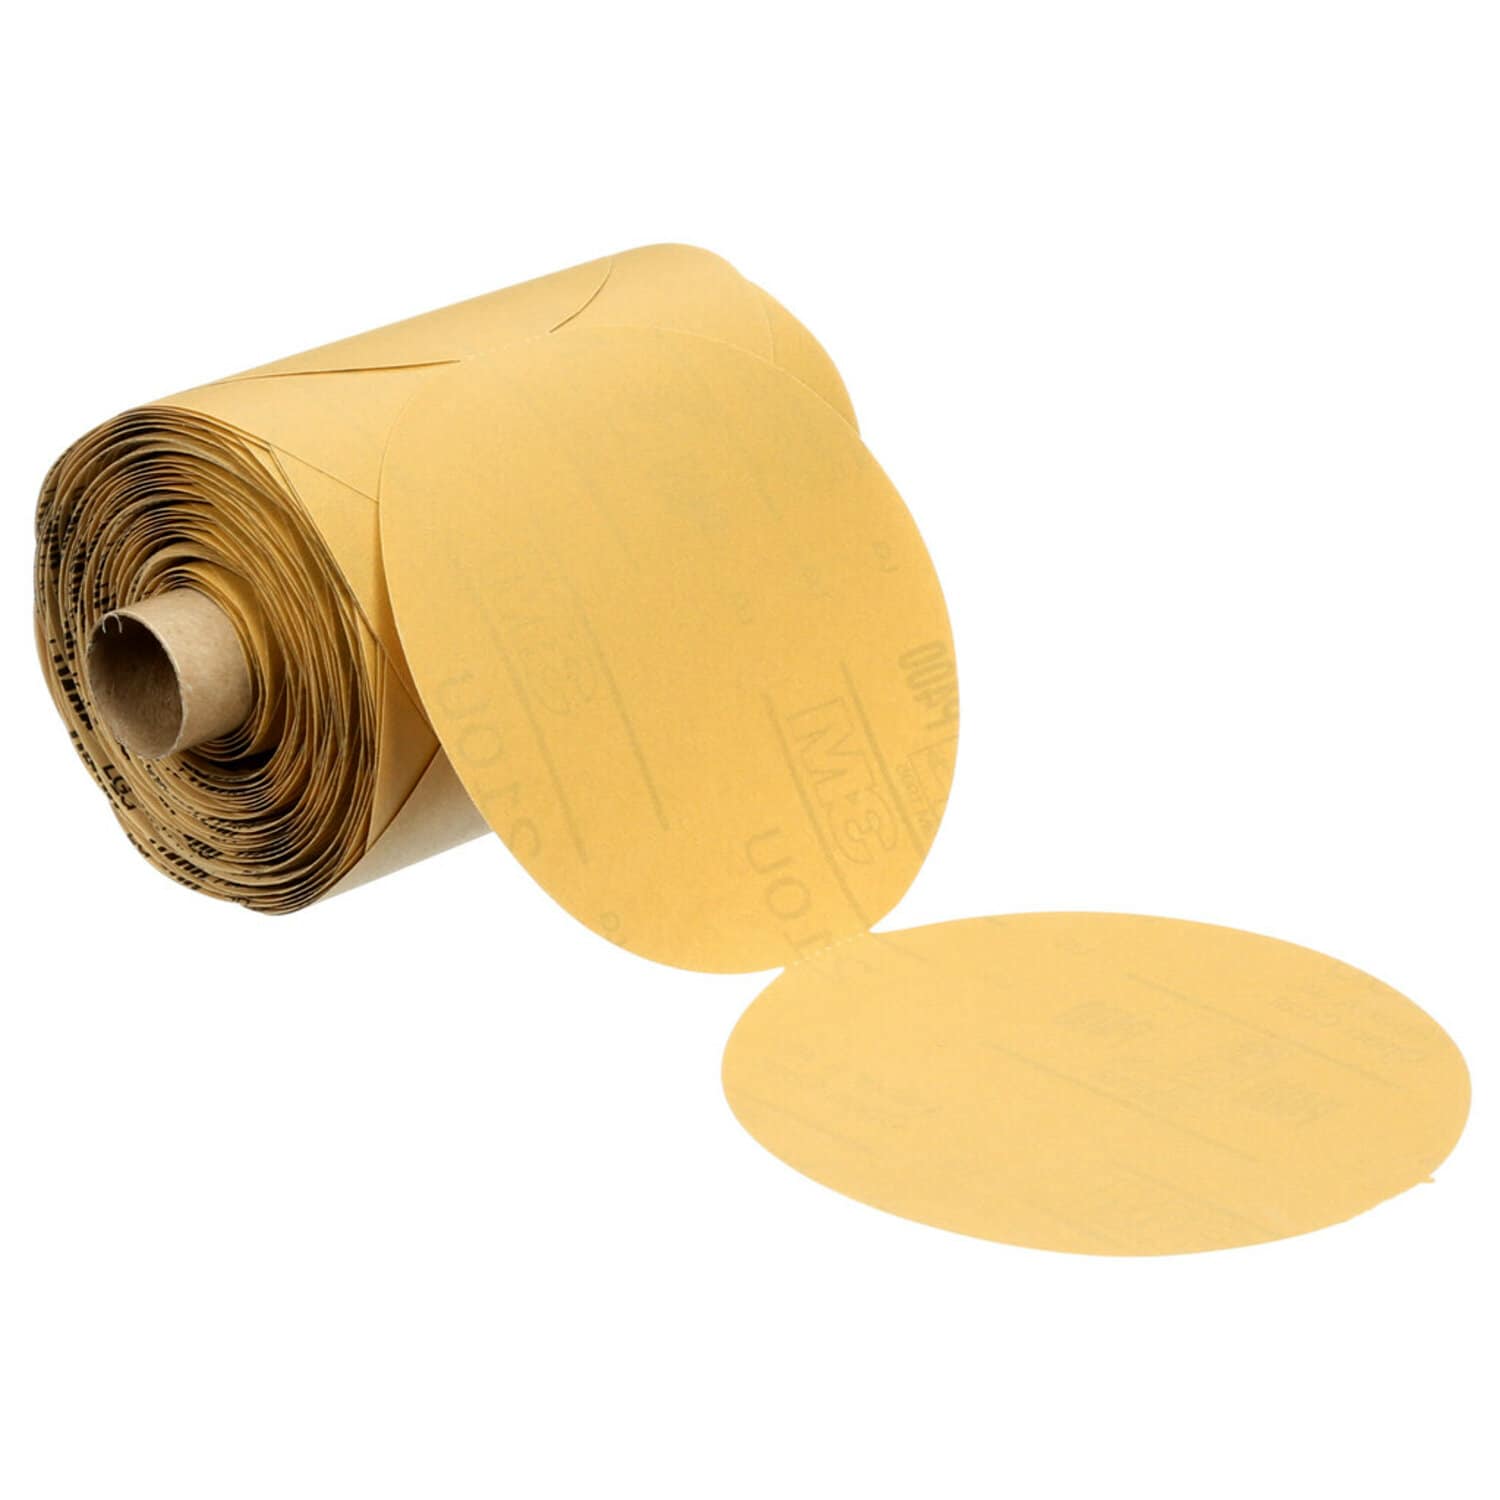 7000118116 - 3M Stikit Paper Disc Roll 210U, P400 A-weight, 5 in x NH, Linered, Die 500X, 250 Discs/Roll, 4 Rolls/Case